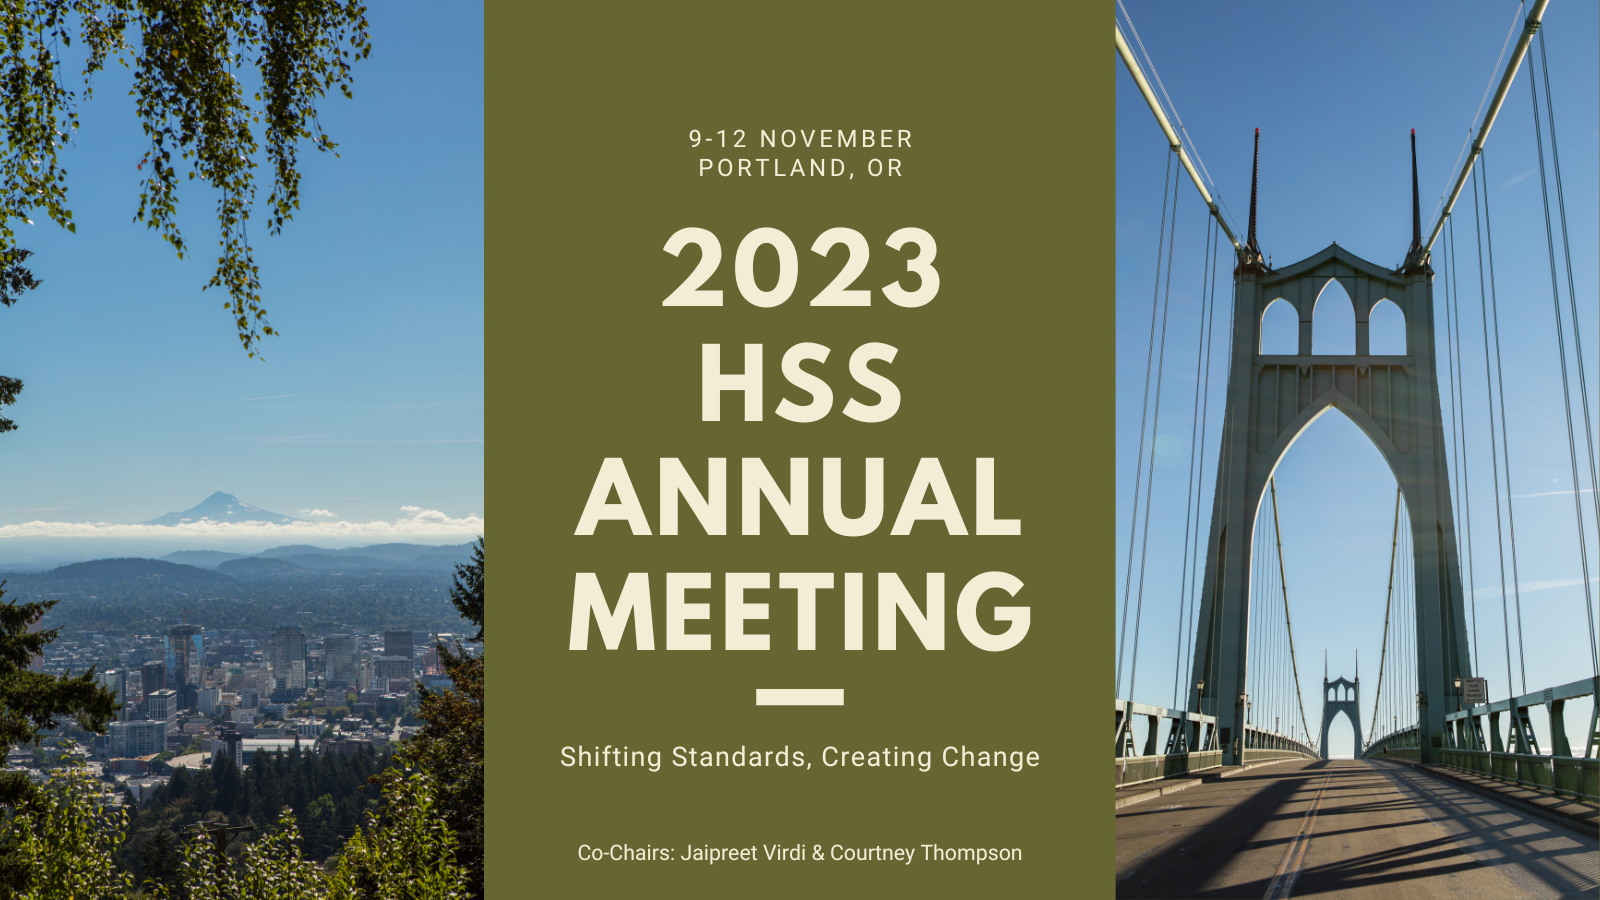 2023 Annual Meeting: Call for Proposals, Shifting Standards, Creating Change.